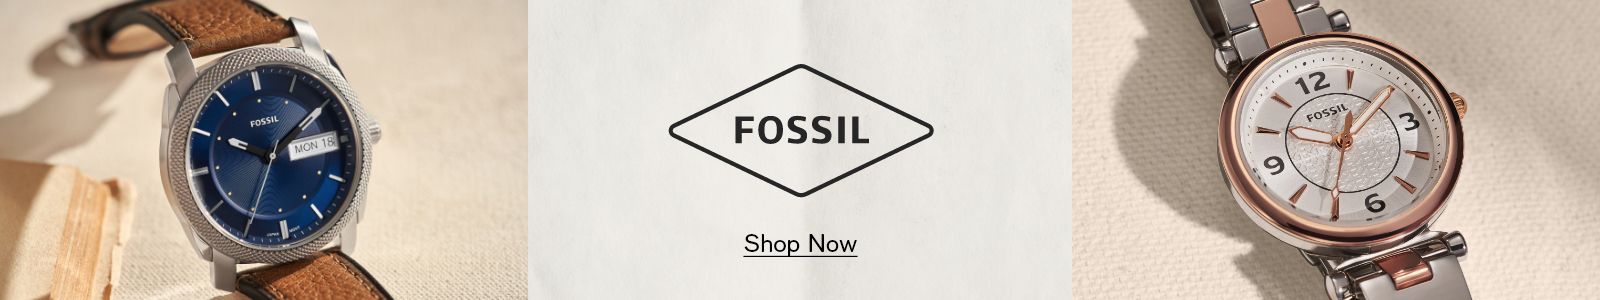 Fossil, Shop Now